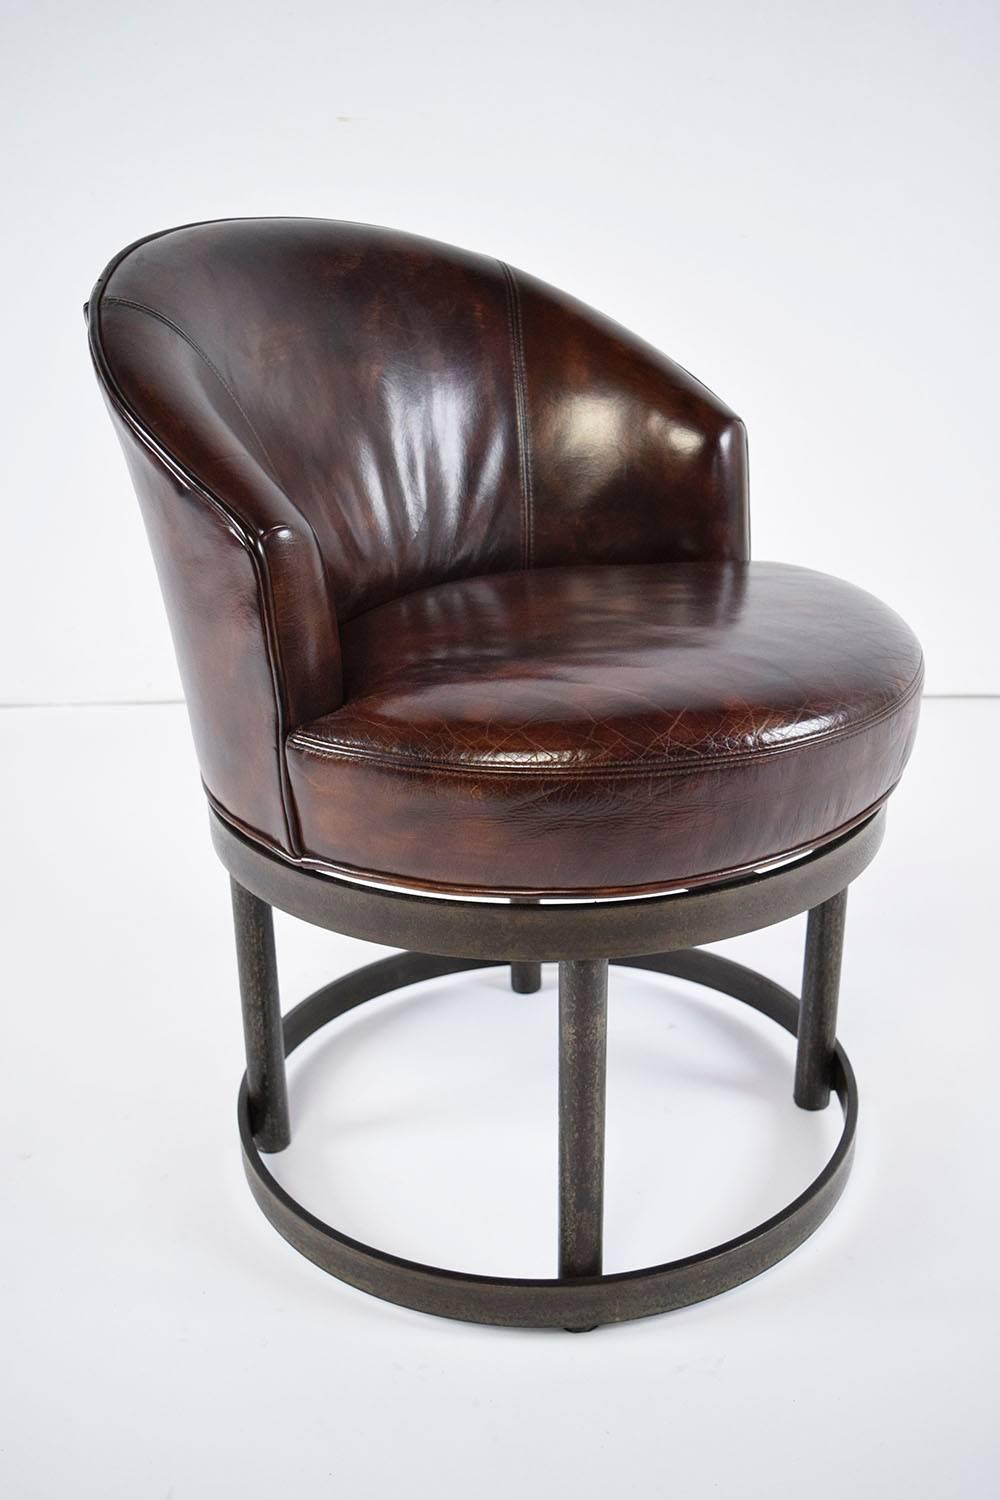 This pair of 1970's Vintage Art Deco-style accent chairs is very unique. The circular, distressed metal bases feature gilt accents and are very sturdy. The seats swivel from side to side and are extremely comfortable. The distressed leather